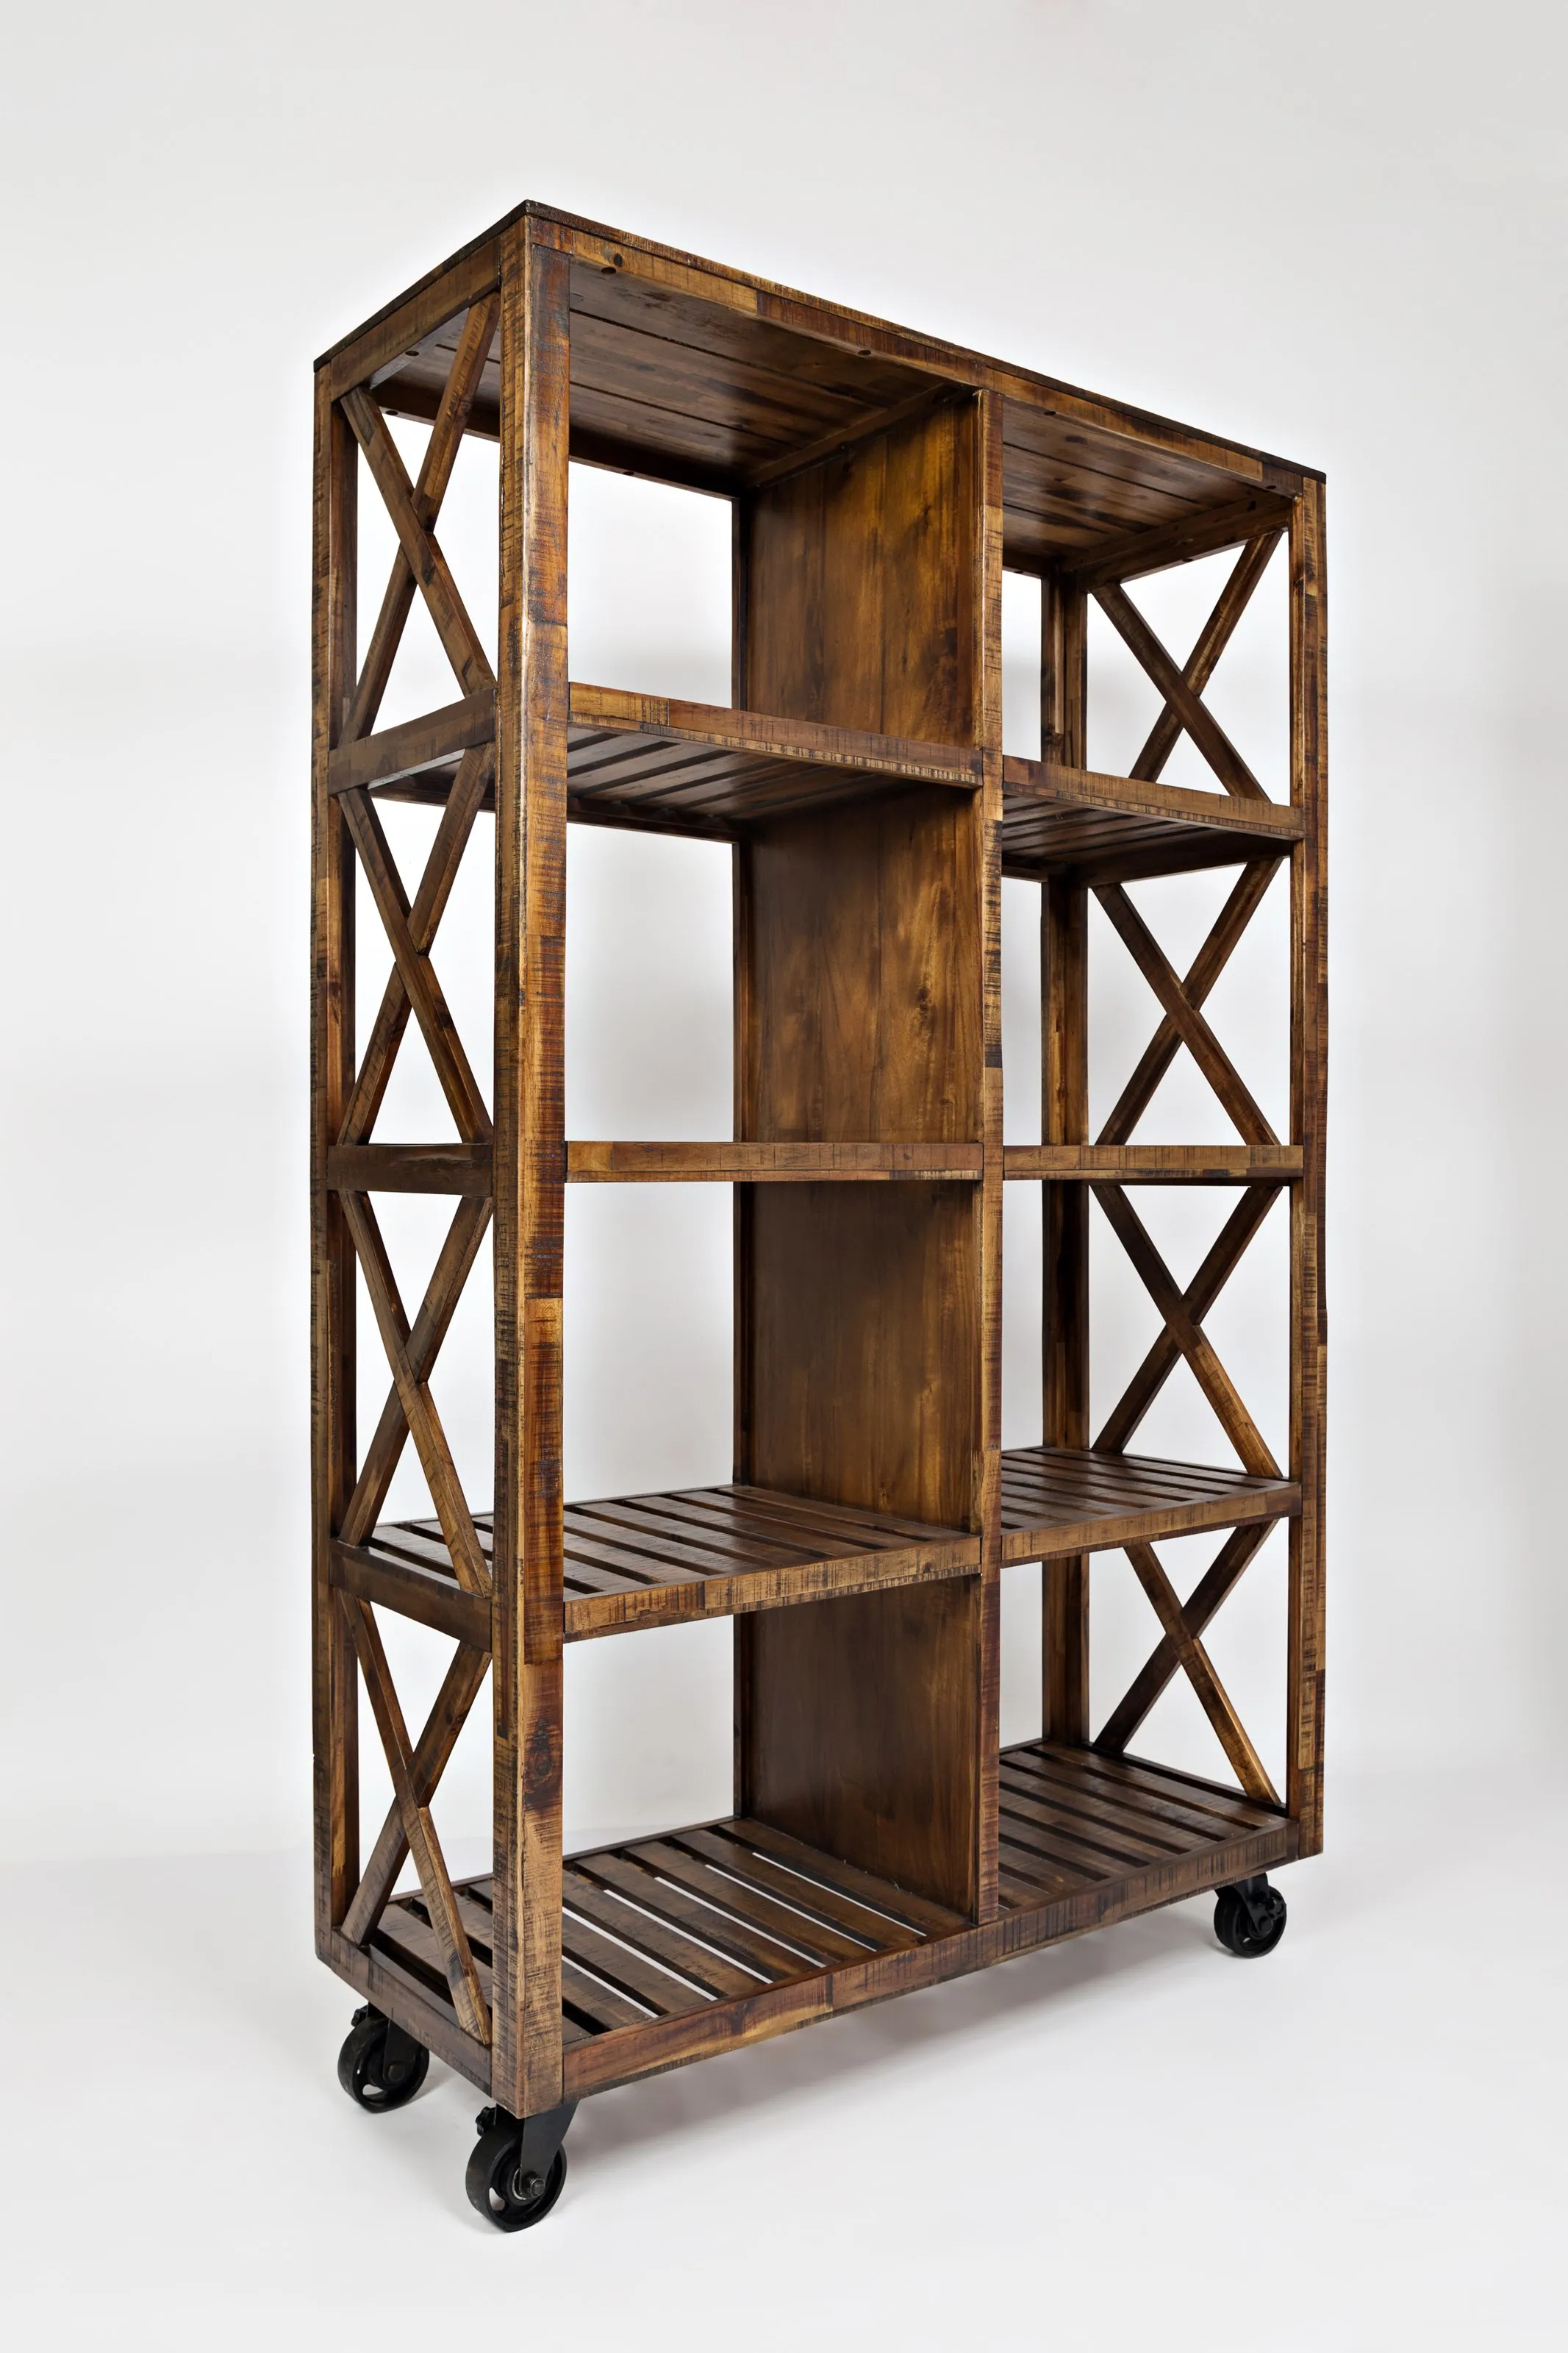 
4 Tier Bookcases and Book Shelves Industrial Vintage Metal and Wood Bookcases Furniture Wrought Iron Bookcase 